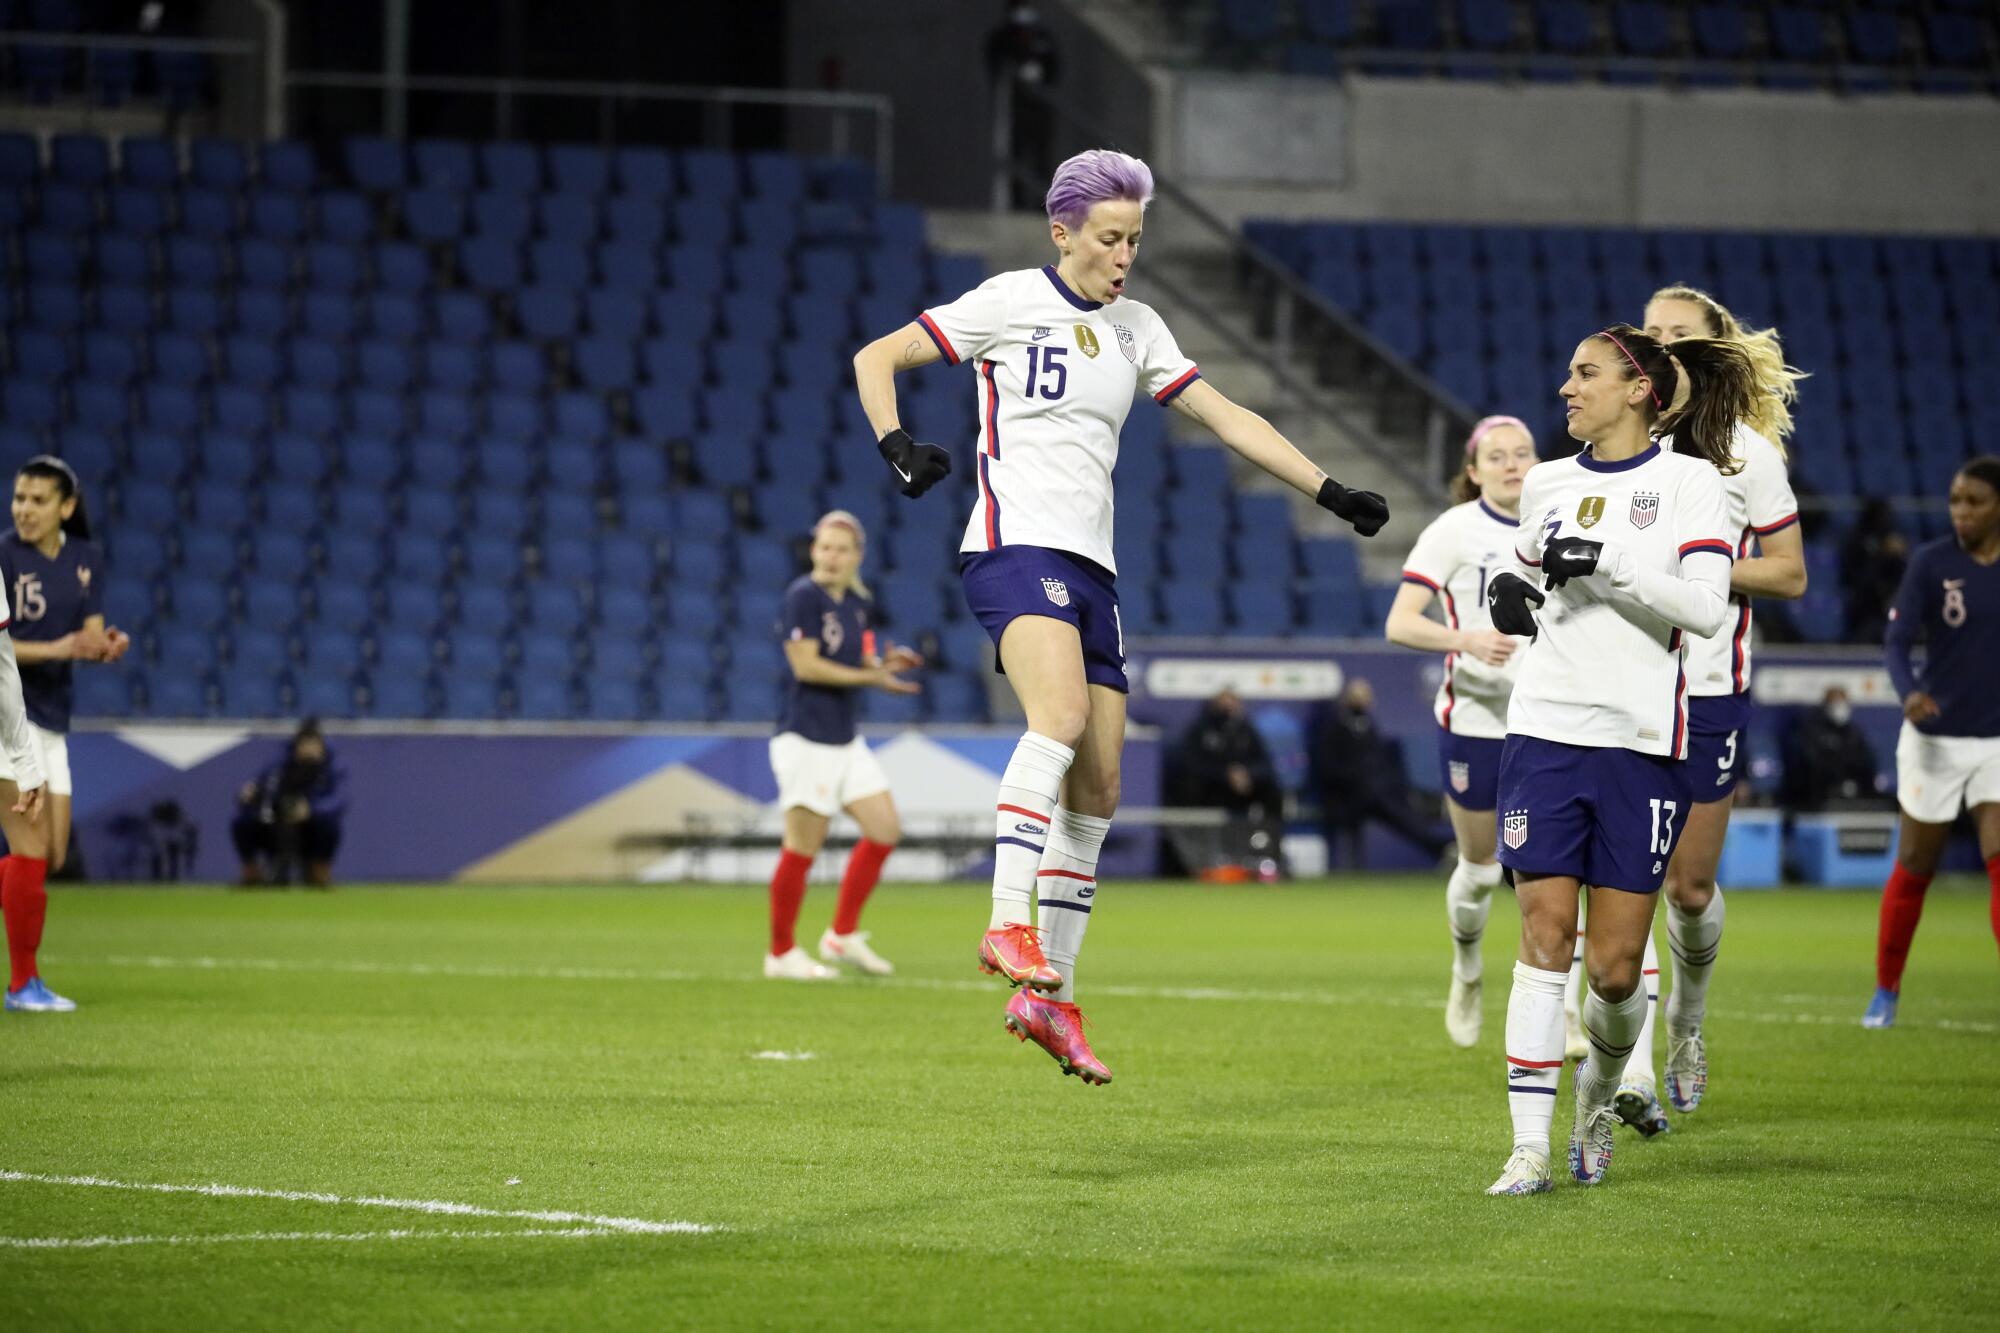 United States' Megan Rapinoe celebrates after scoring by jumping in the air